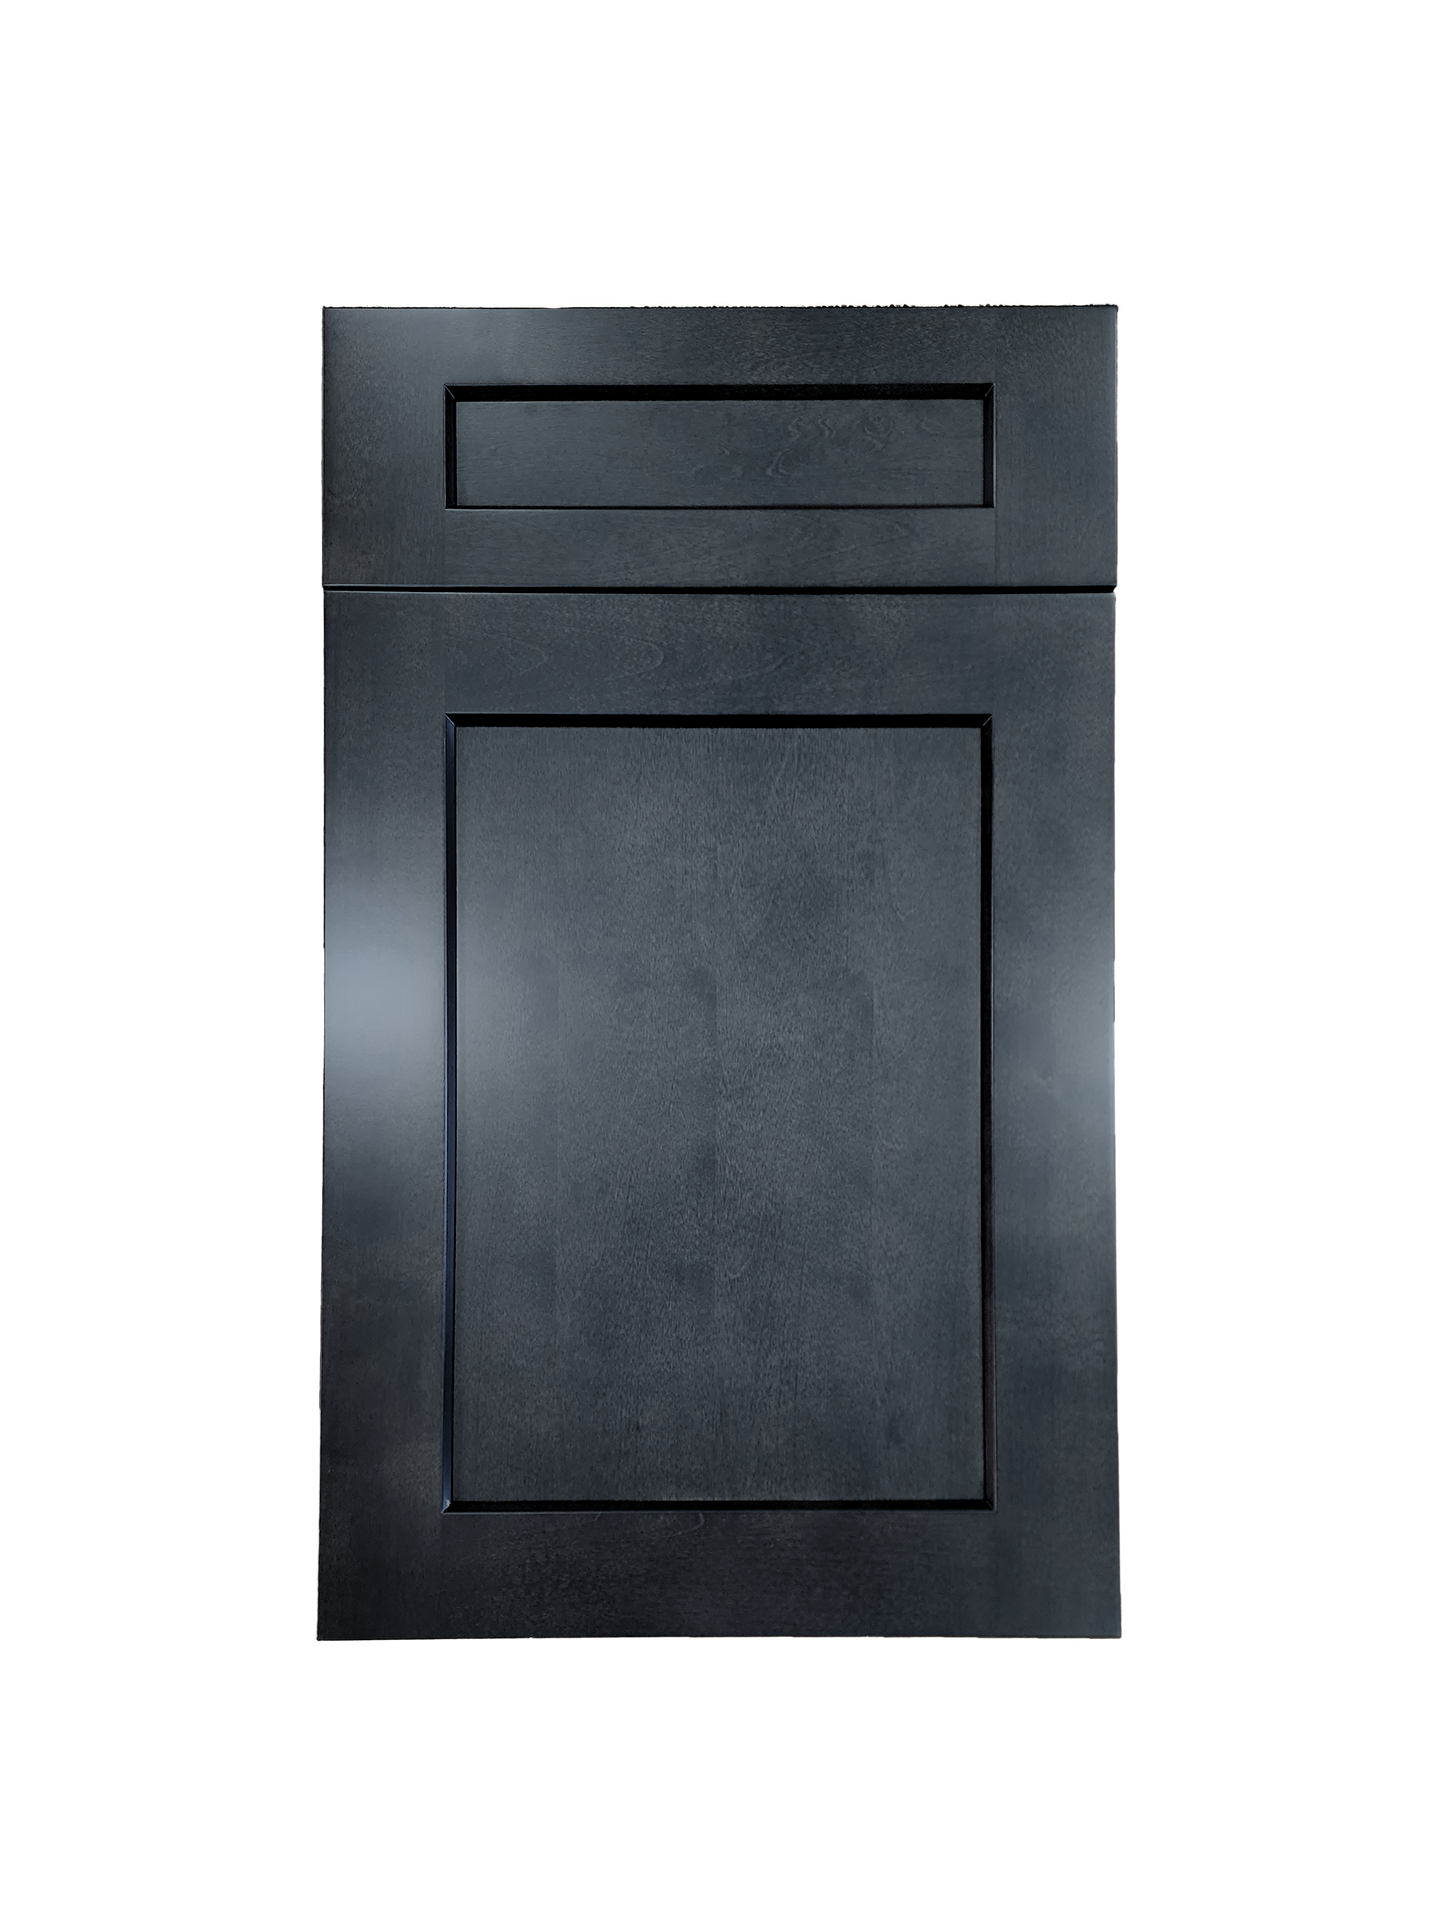 Stormy Grey Base Cabinet 18 inches wide 24 inches deep 34.5 inches tall with Stormy Grey box and Stormy Grey doors